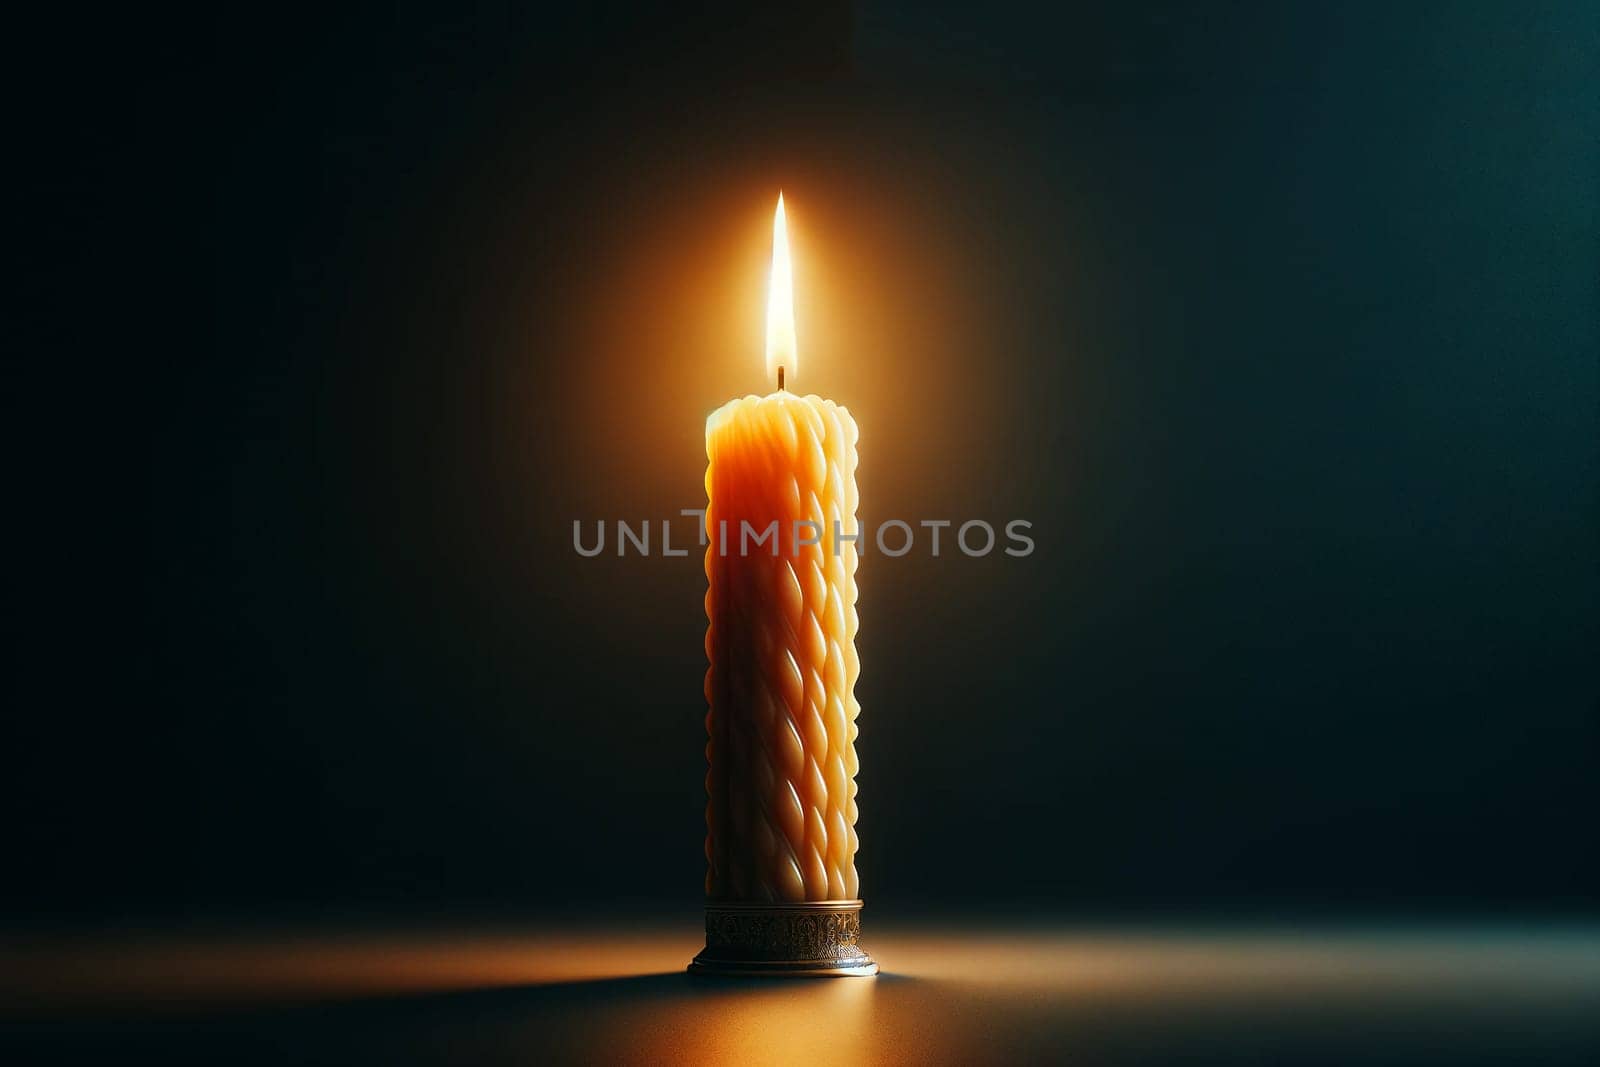 Warm light of the flame of a burning church wax candle on a dark background by Annado